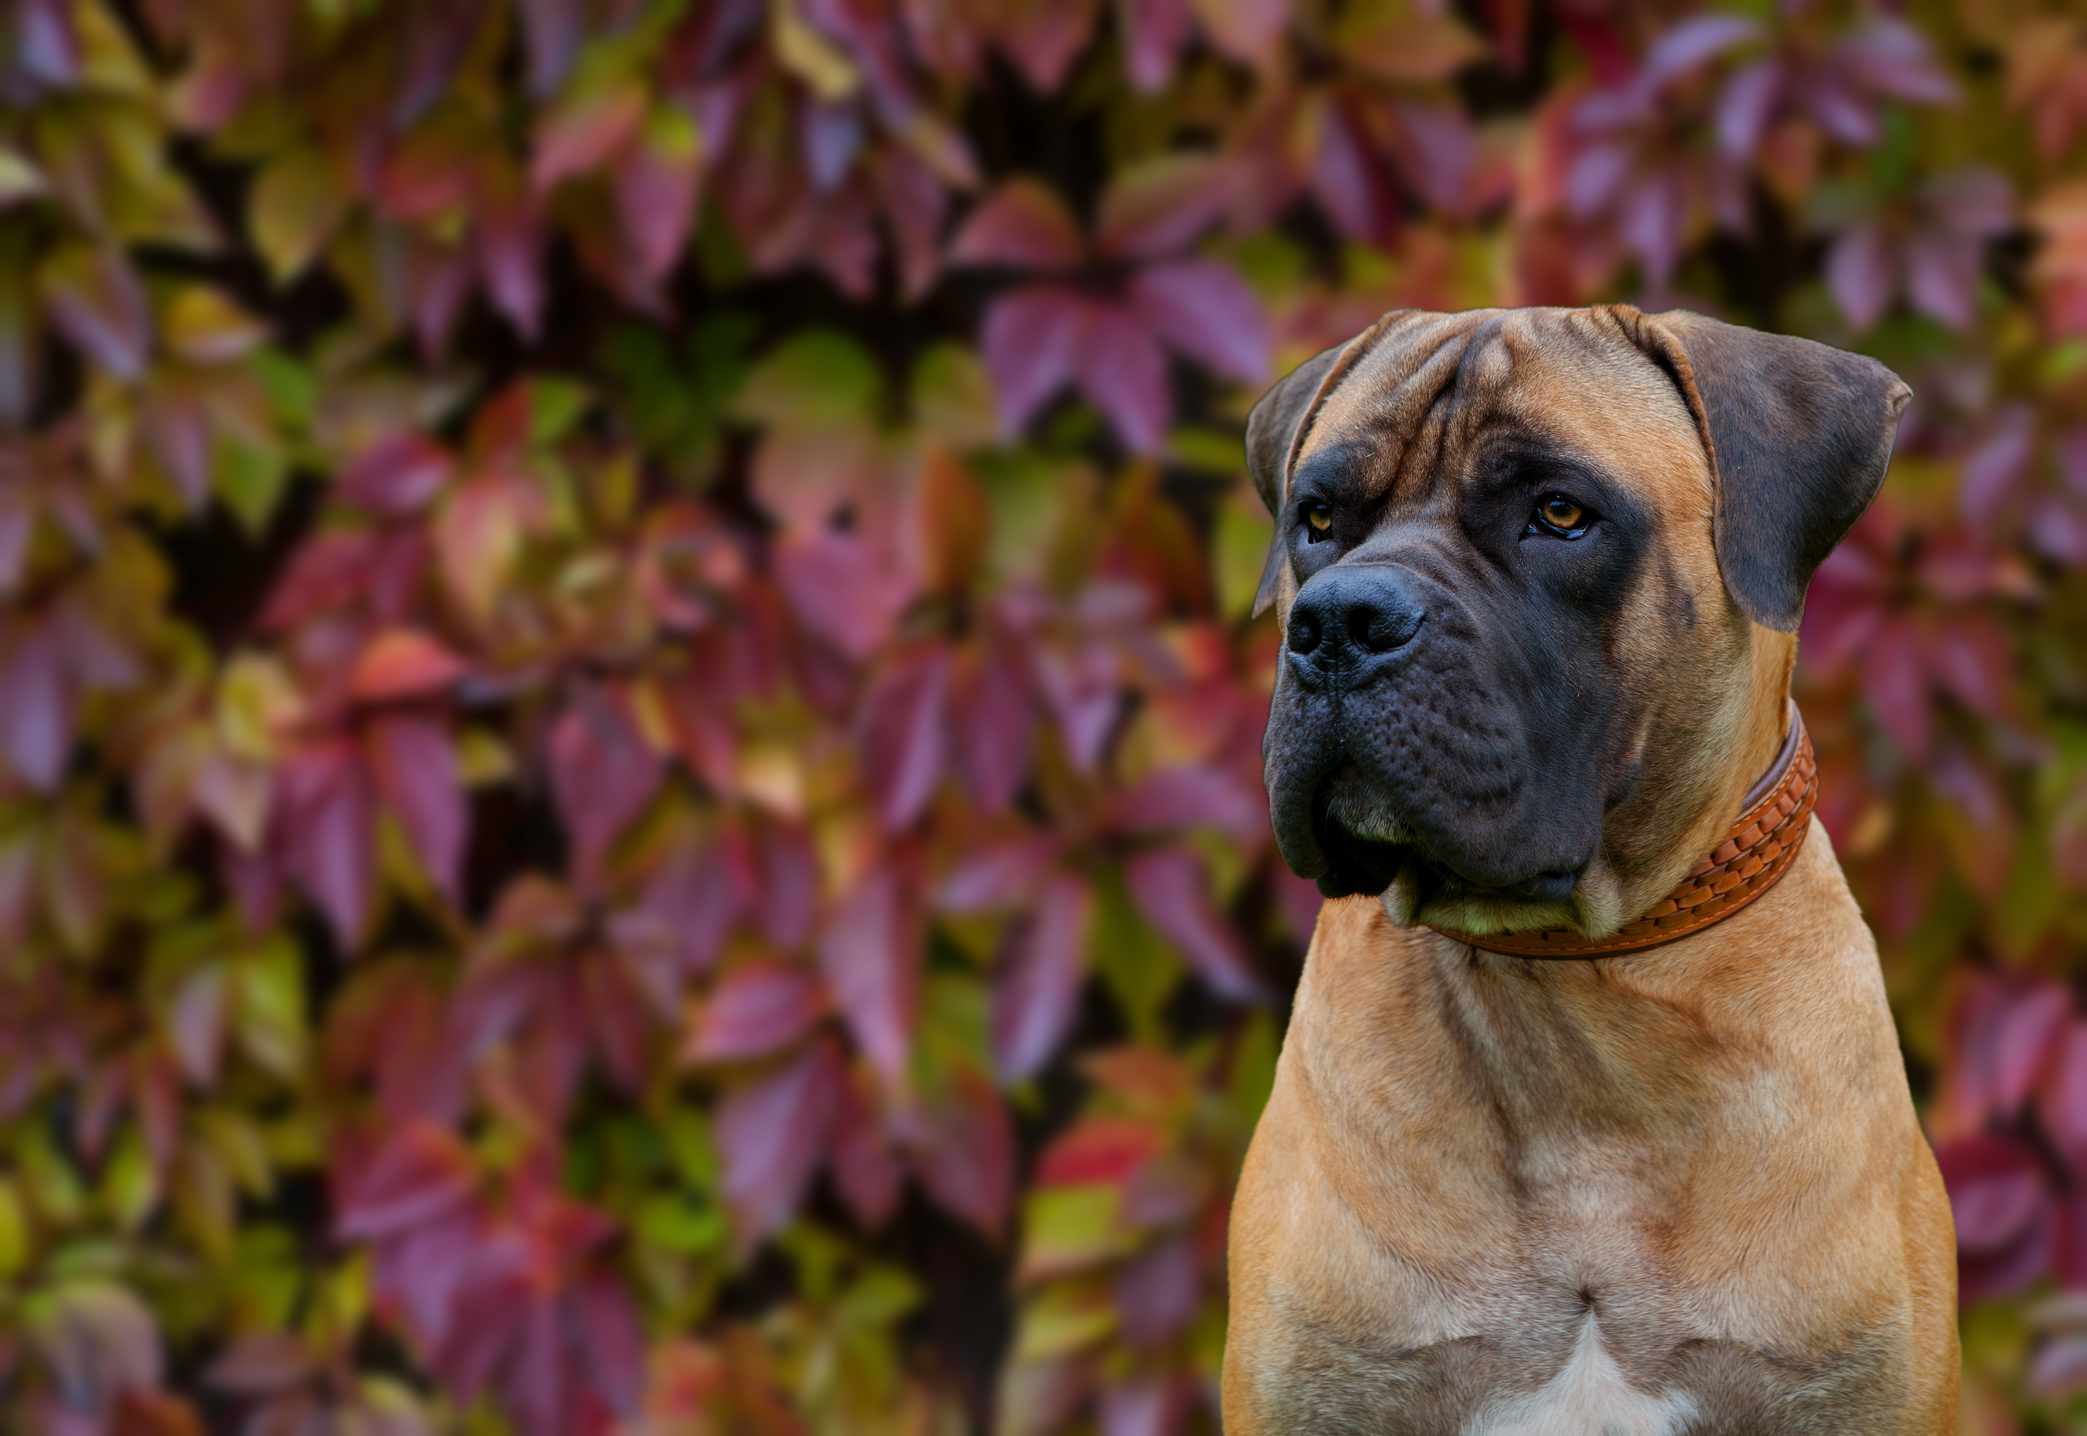 A large dog, resembling a mastiff, looking away from the camera in front of leaves.